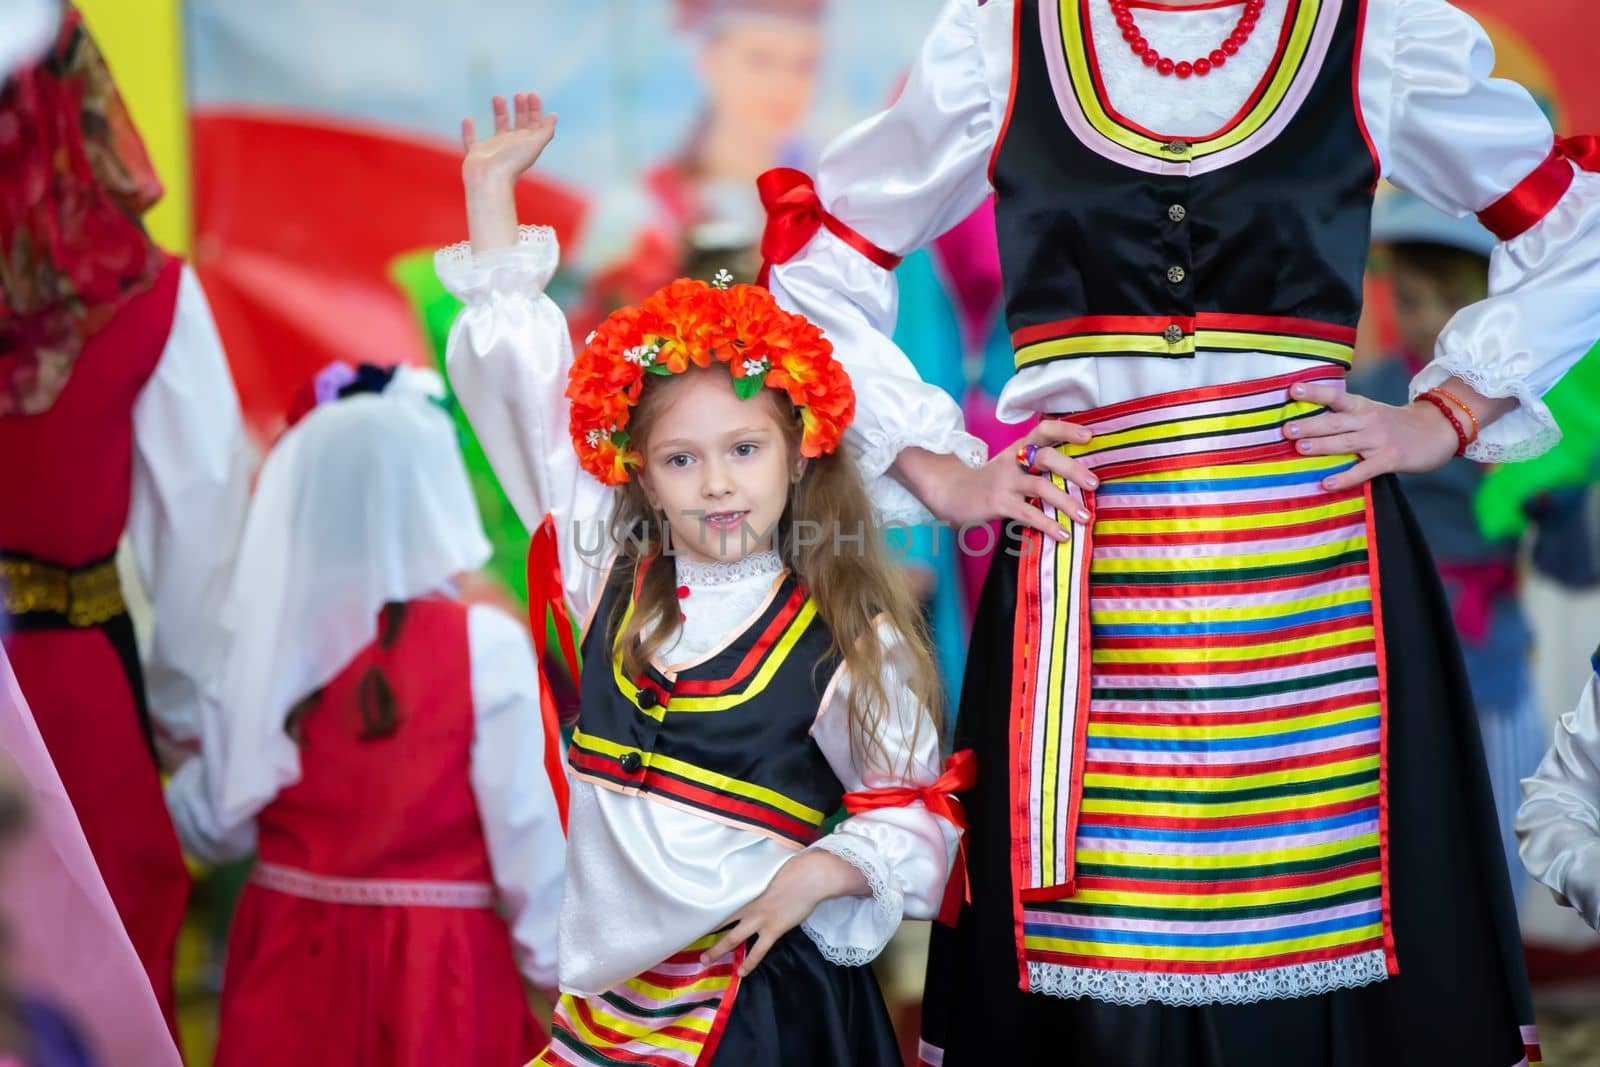 Belarus, city of Gomel, May 21, 2021 Children's holiday in the city. A little girl in a Ukrainian costume is dancing.